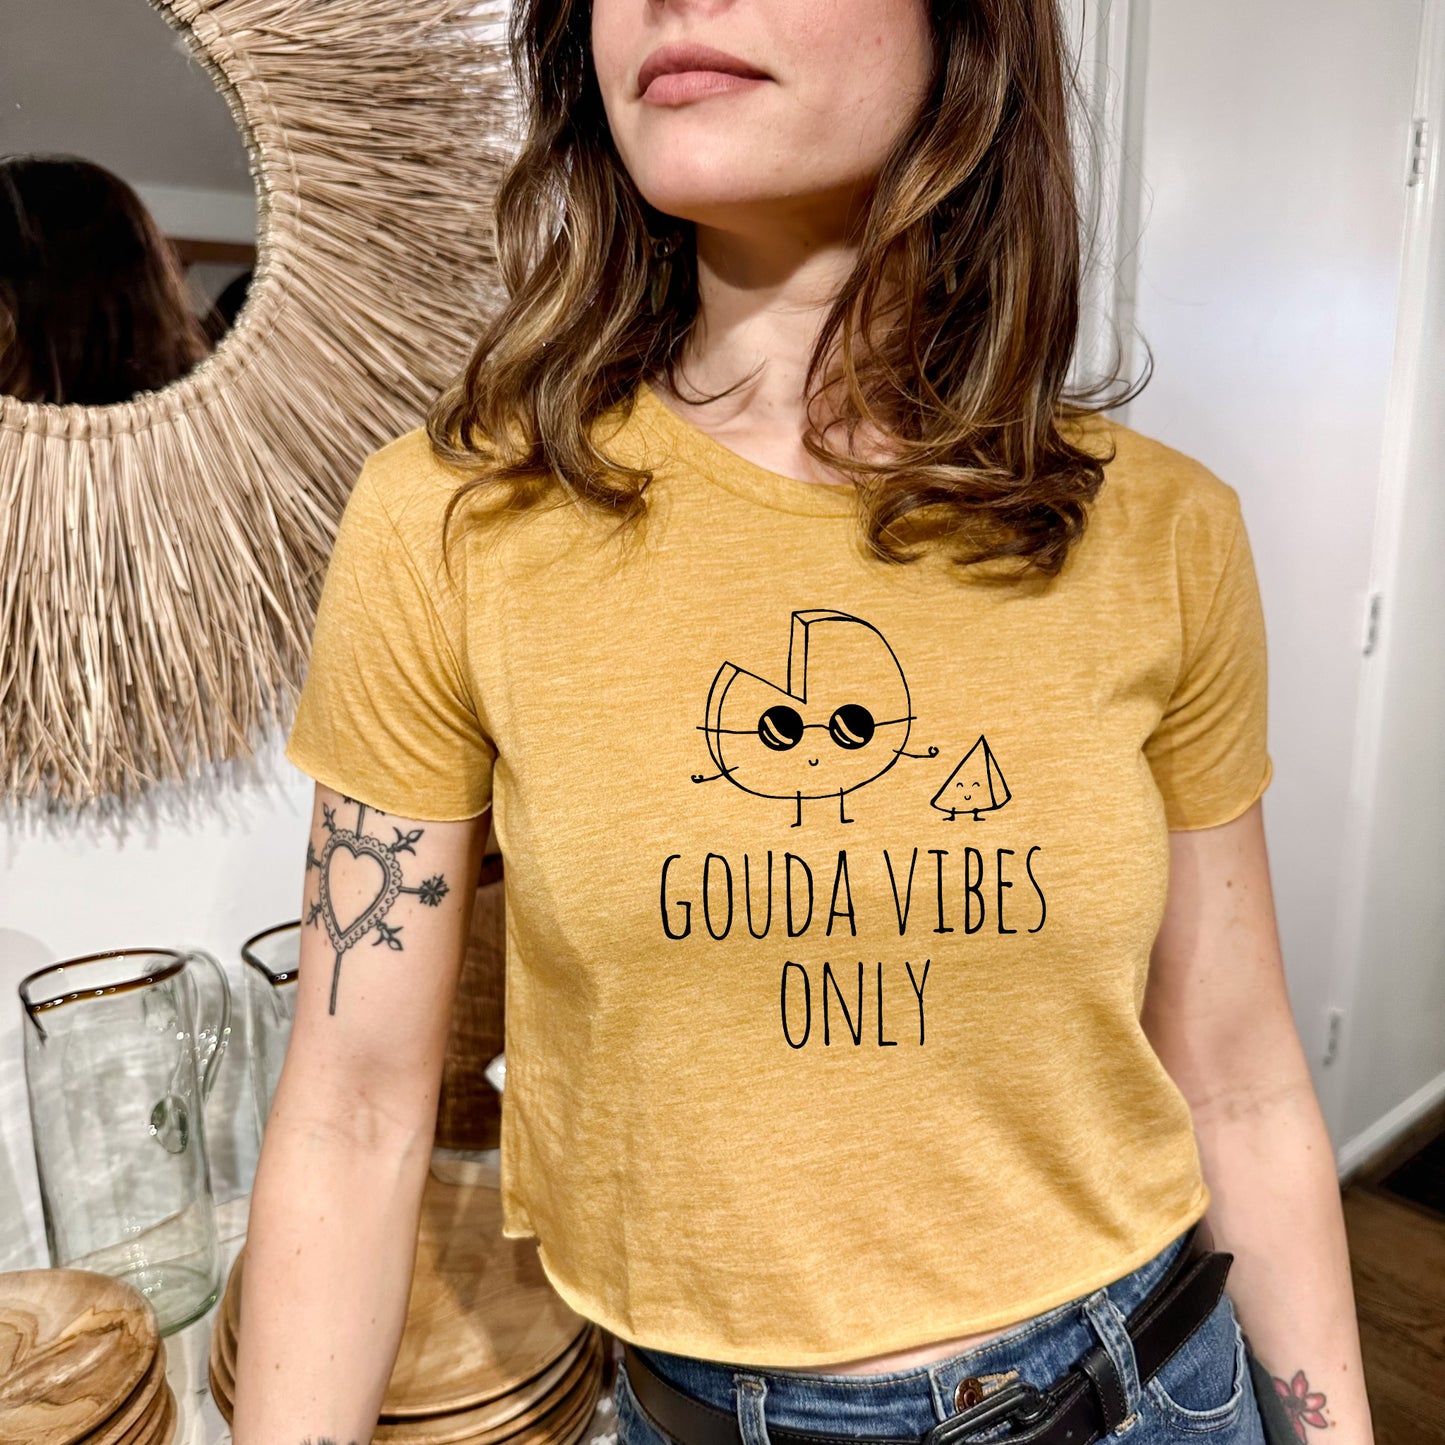 Gouda Vibes Only - Women's Crop Tee - Heather Gray or Gold